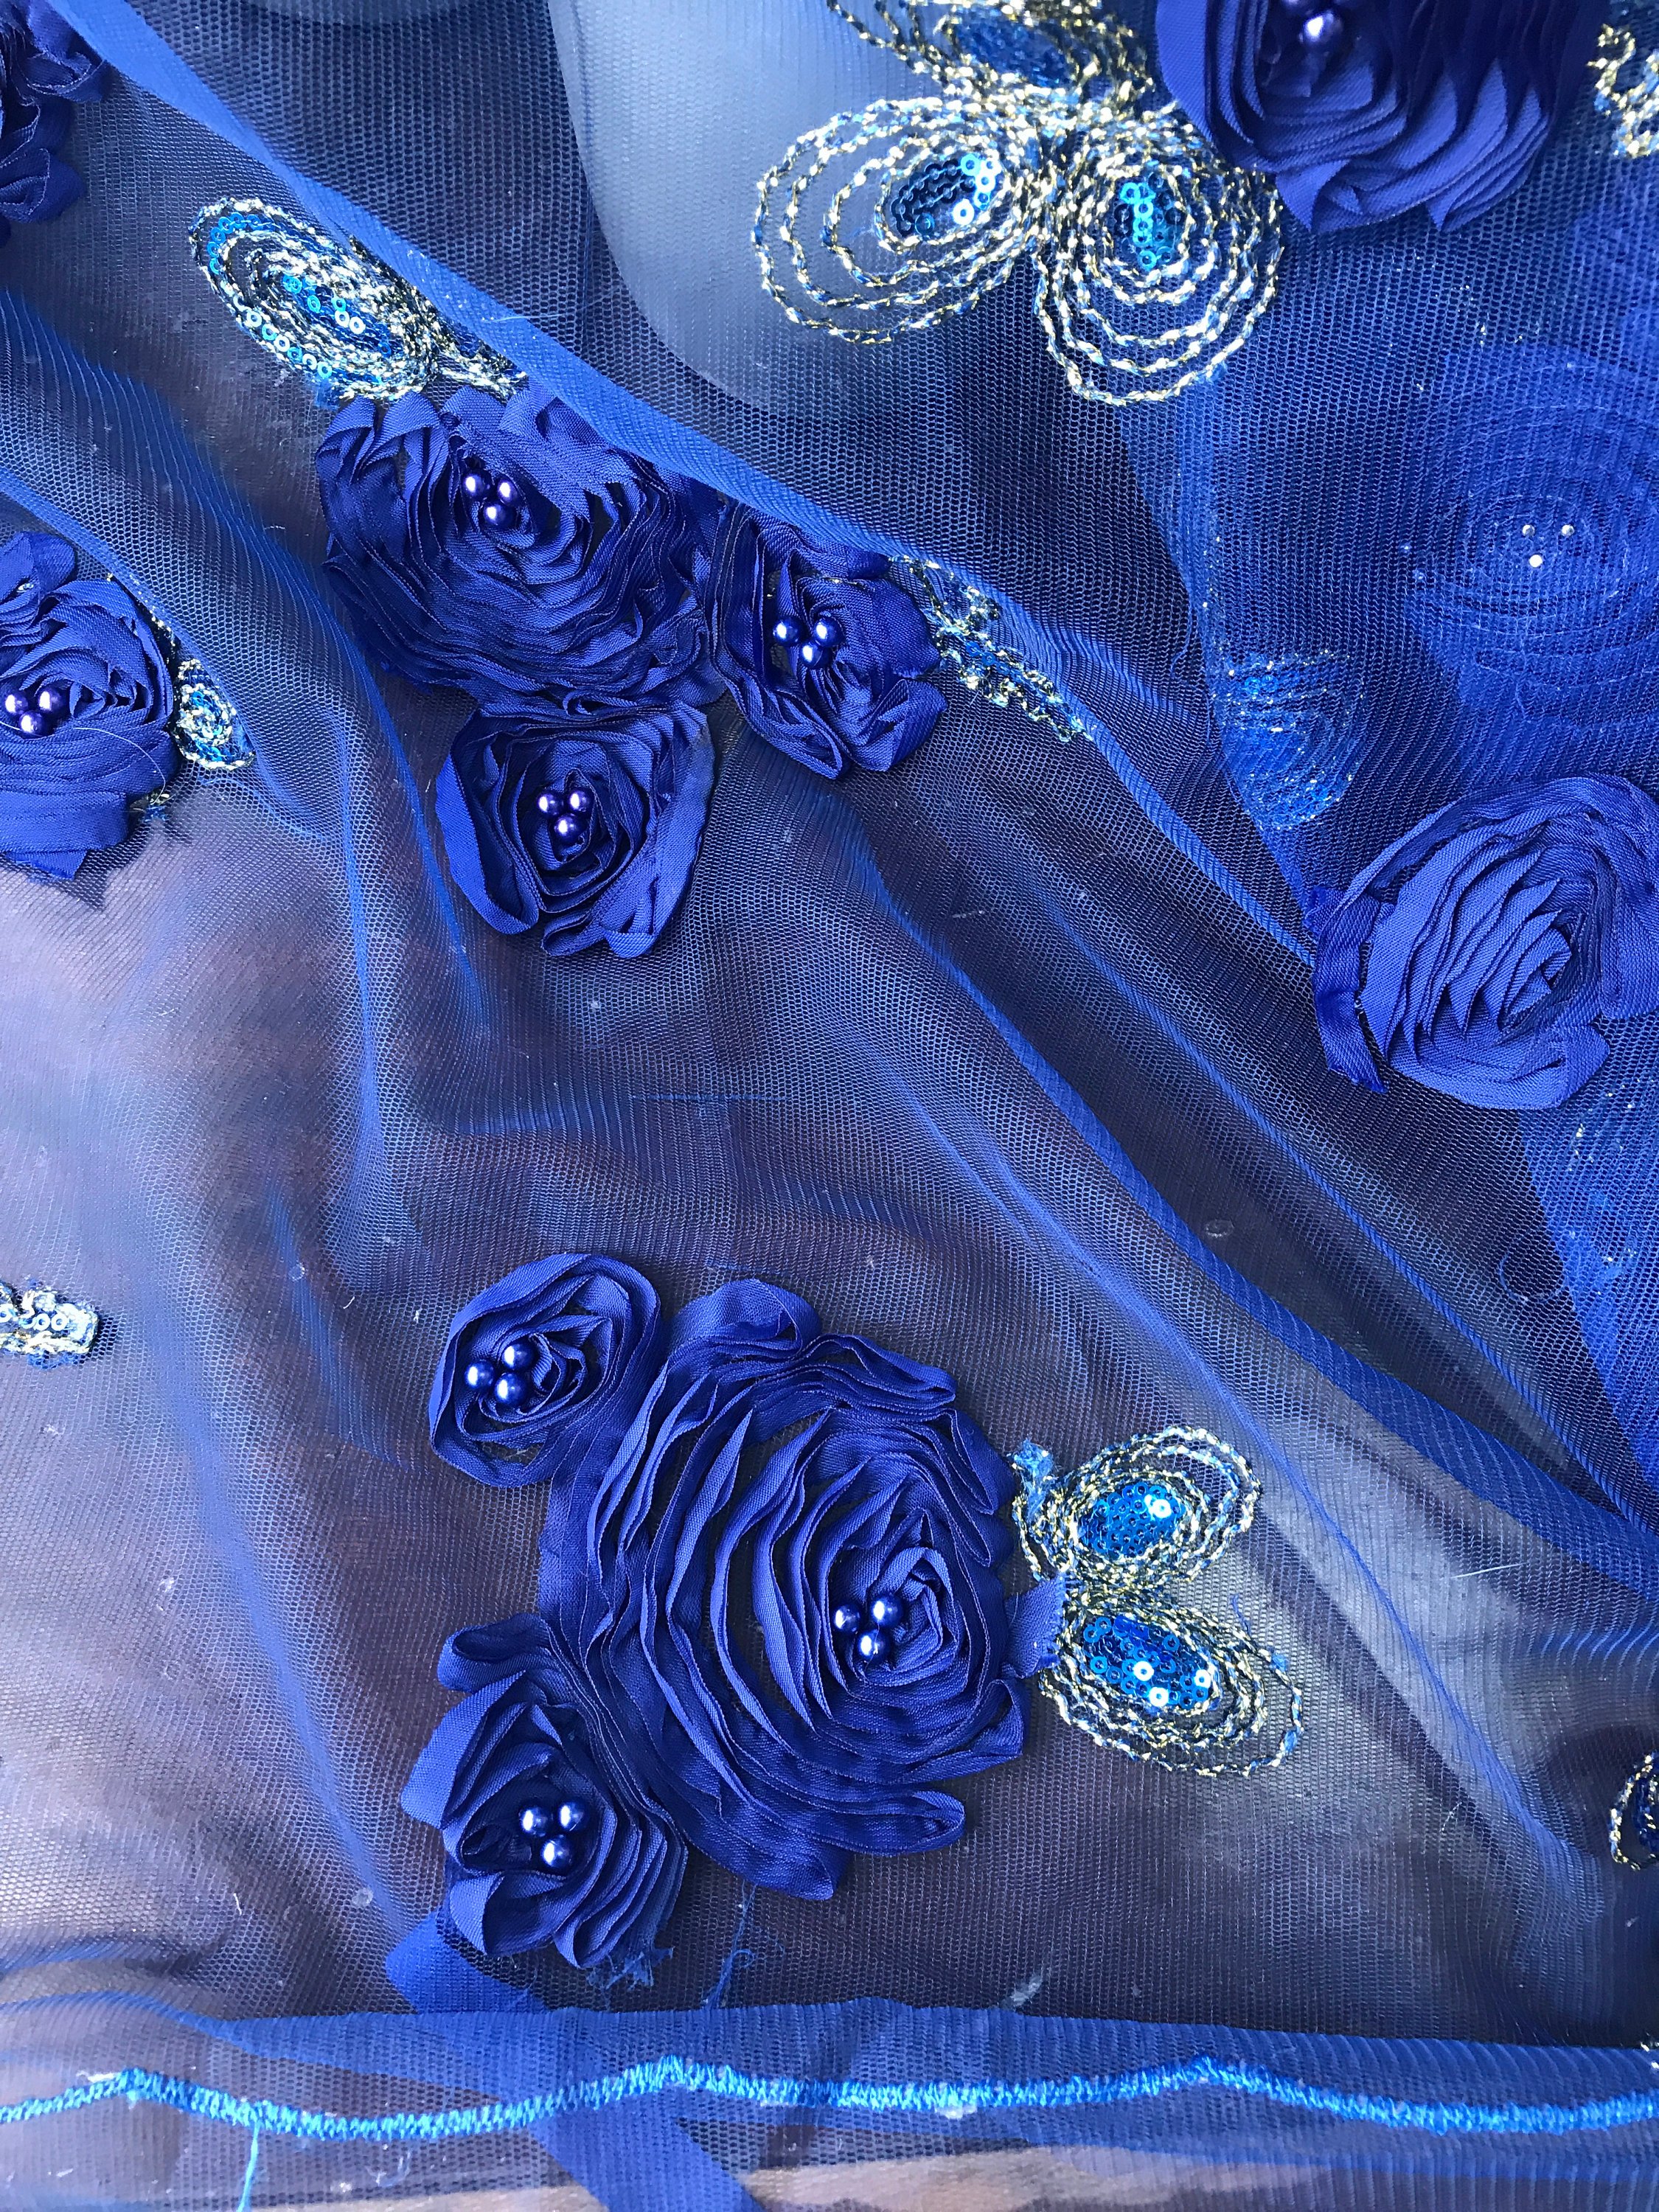 Blue lace fabric 3D roses flowers embroidered sequins pearls scallop edge formal evening prom bridal, cobalt blue